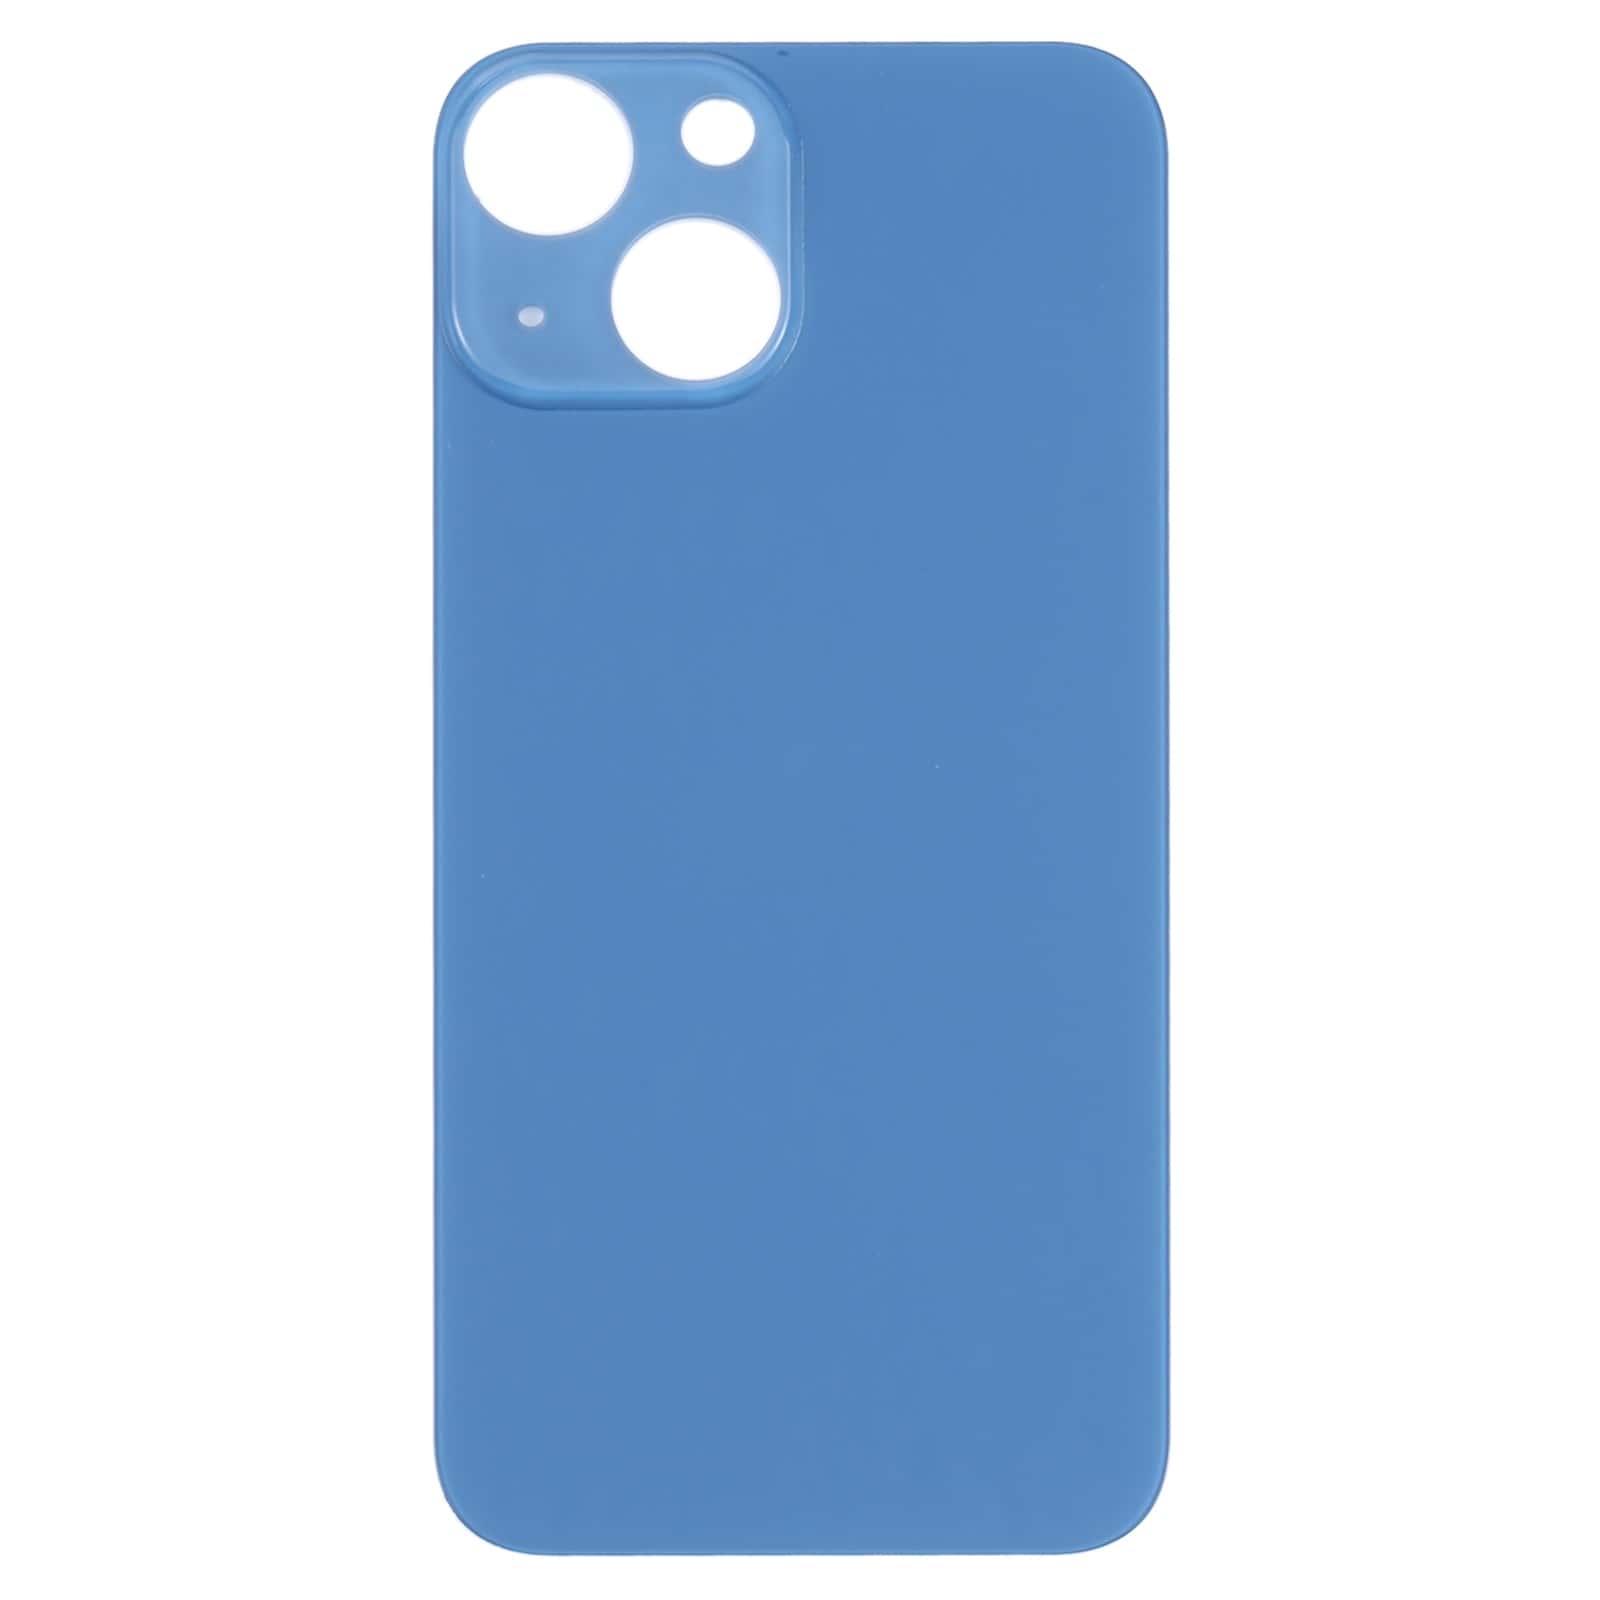 Back Glass Panel for  iPhone 13 mini Blue